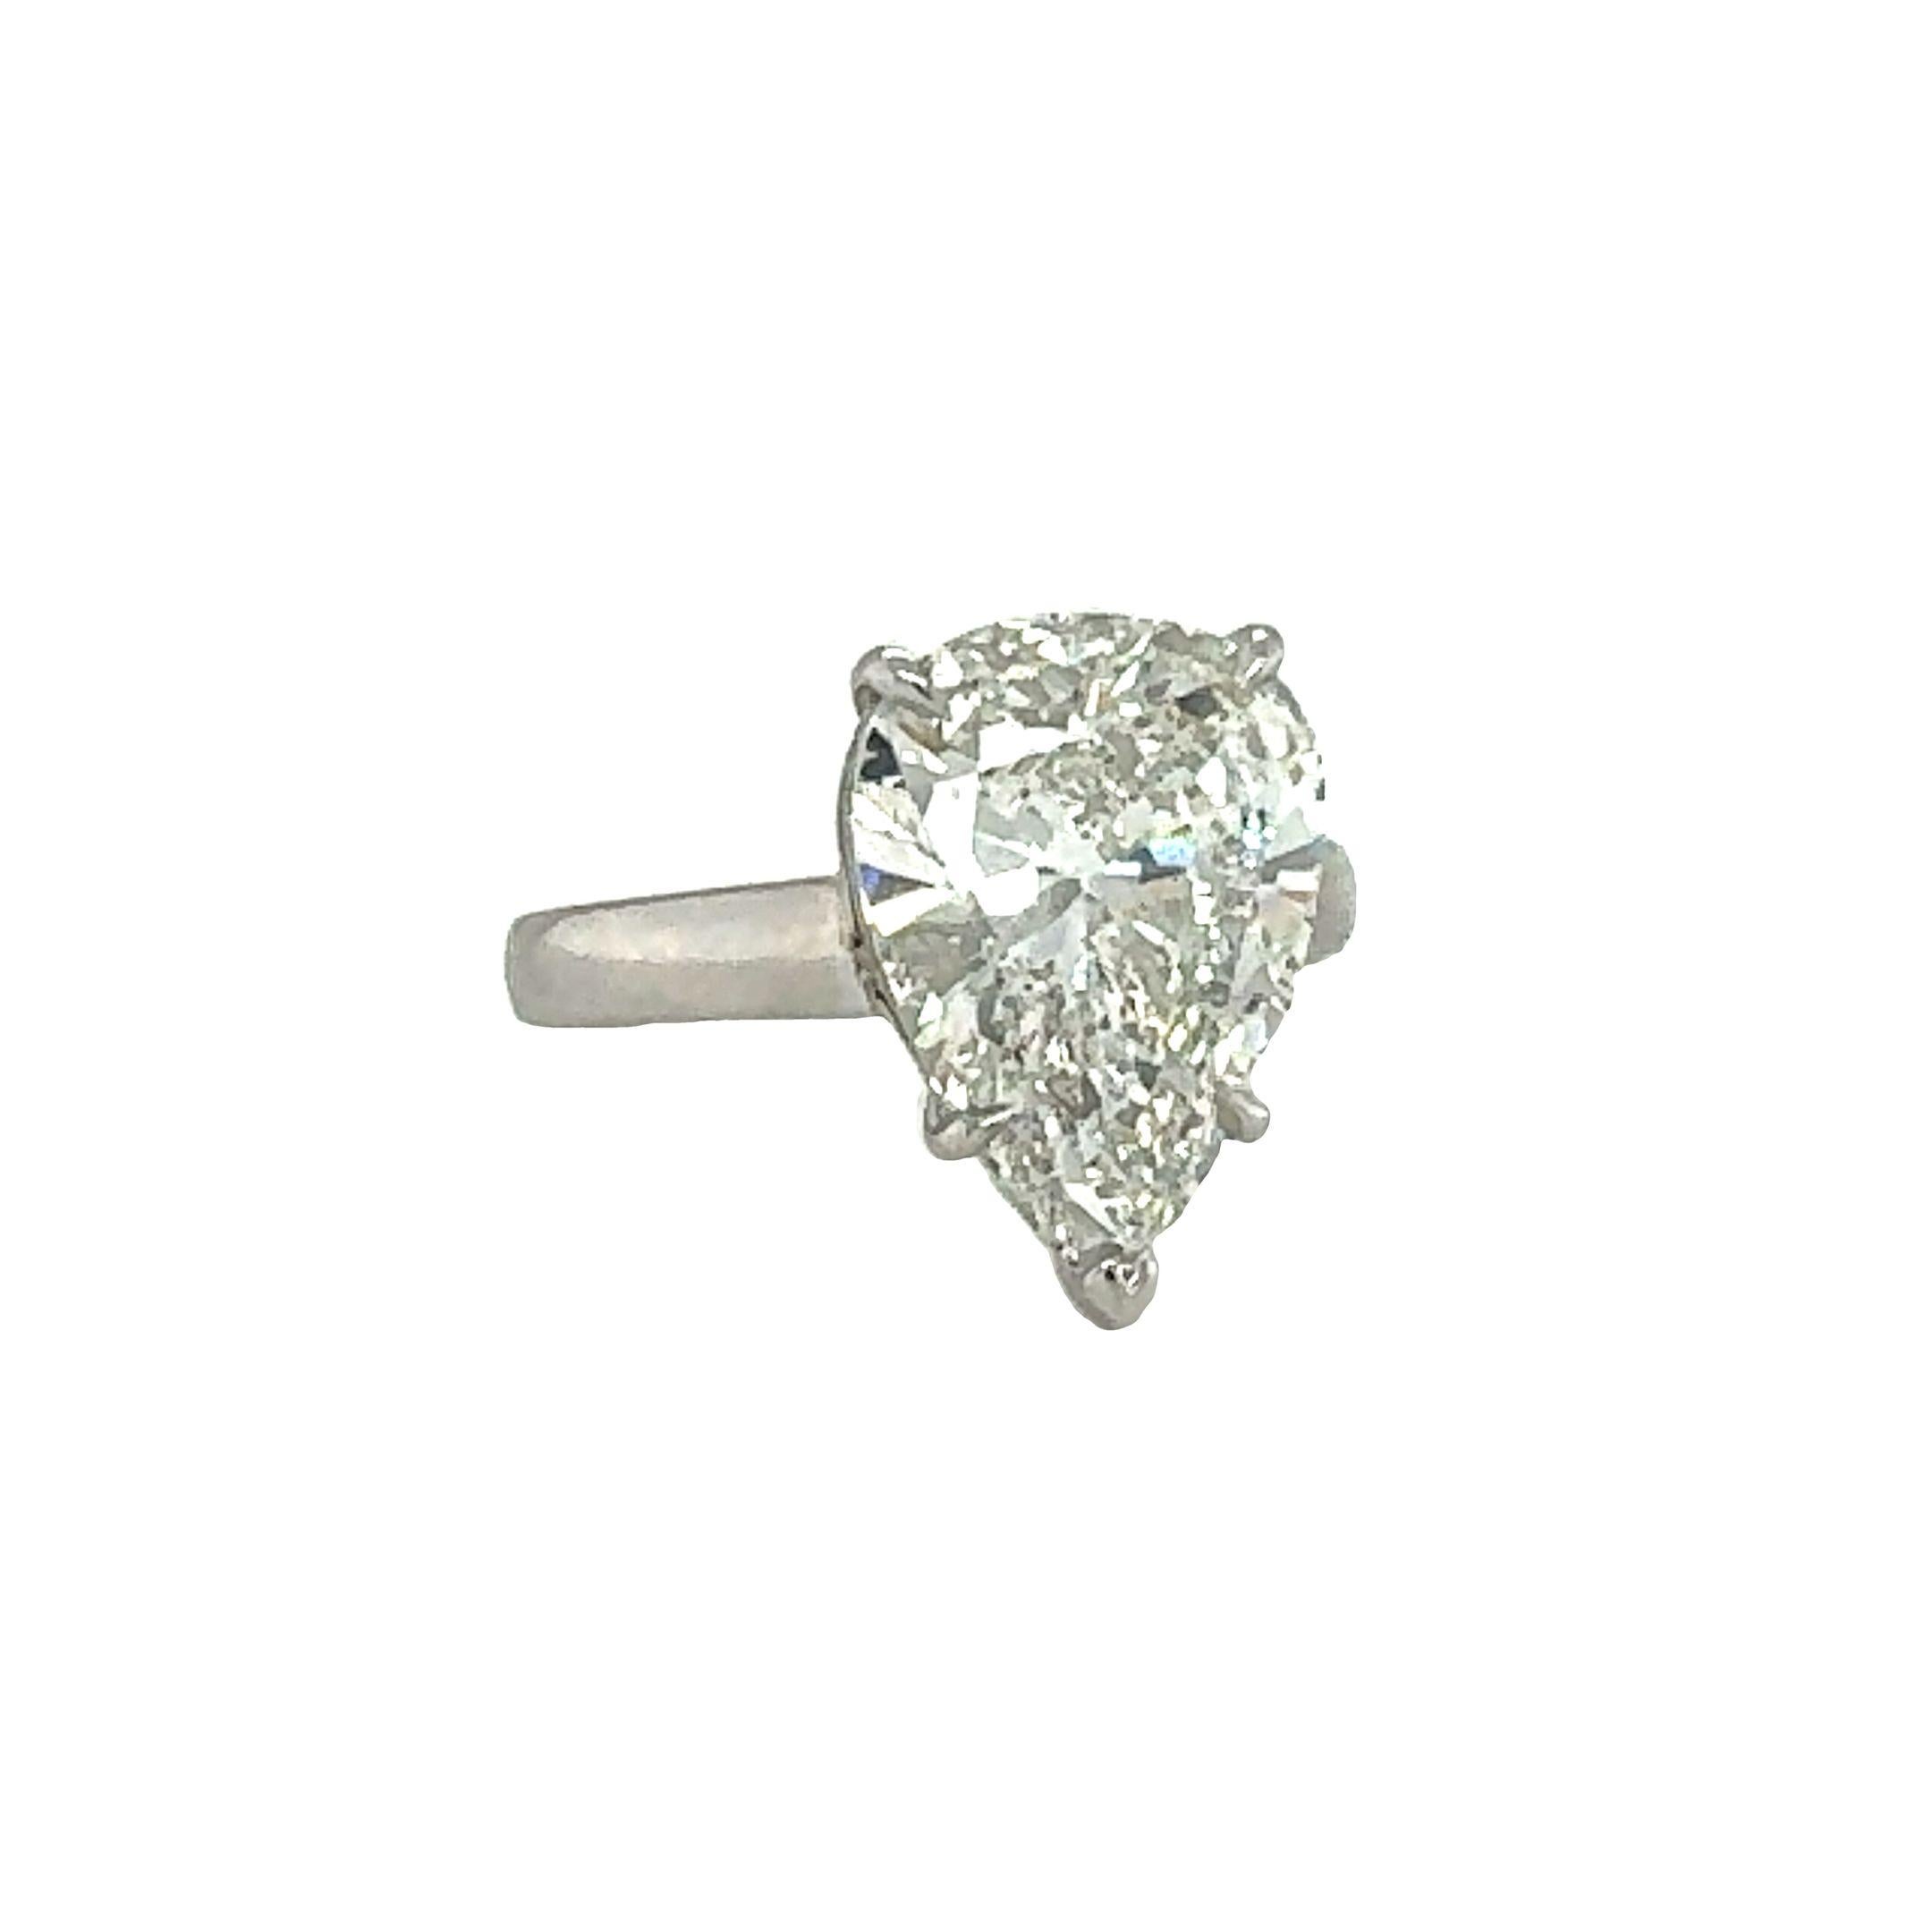 One GIA certified 5.31 ct. diamond platinum engagement ring centering one claw prong set, pear brilliant cut diamond stating J color and I-1 clarity (laser inscribed with GIA). The ring mount is enhanced with a sturdy gallery and shank to